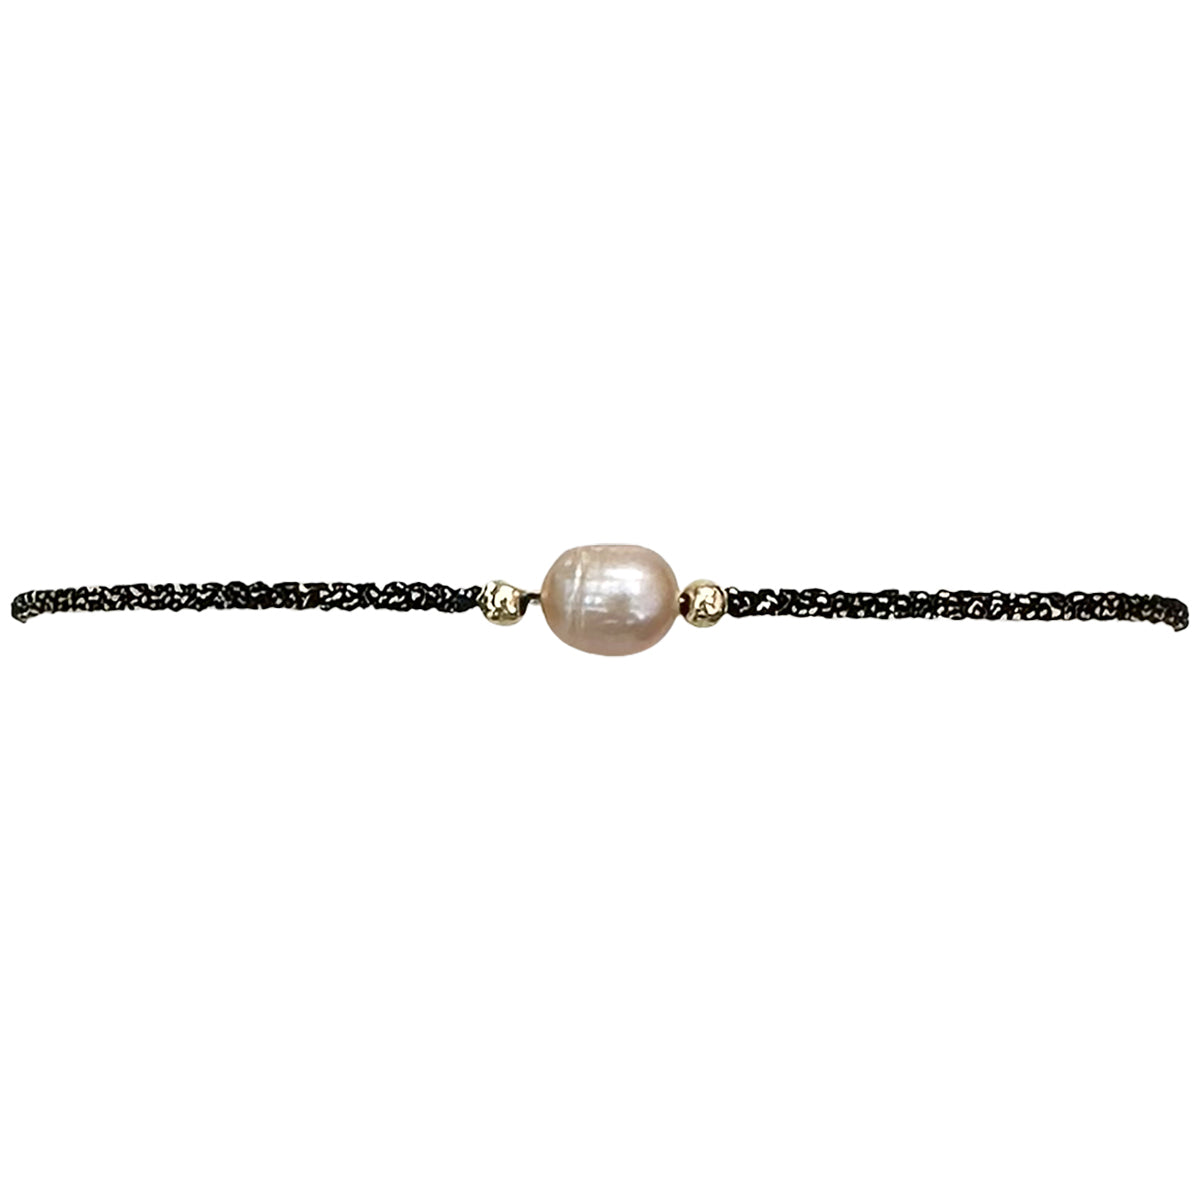 HANDMADE COCOA BRACELET IN DARK TONES FEATURING A FRESHWATER PEARL